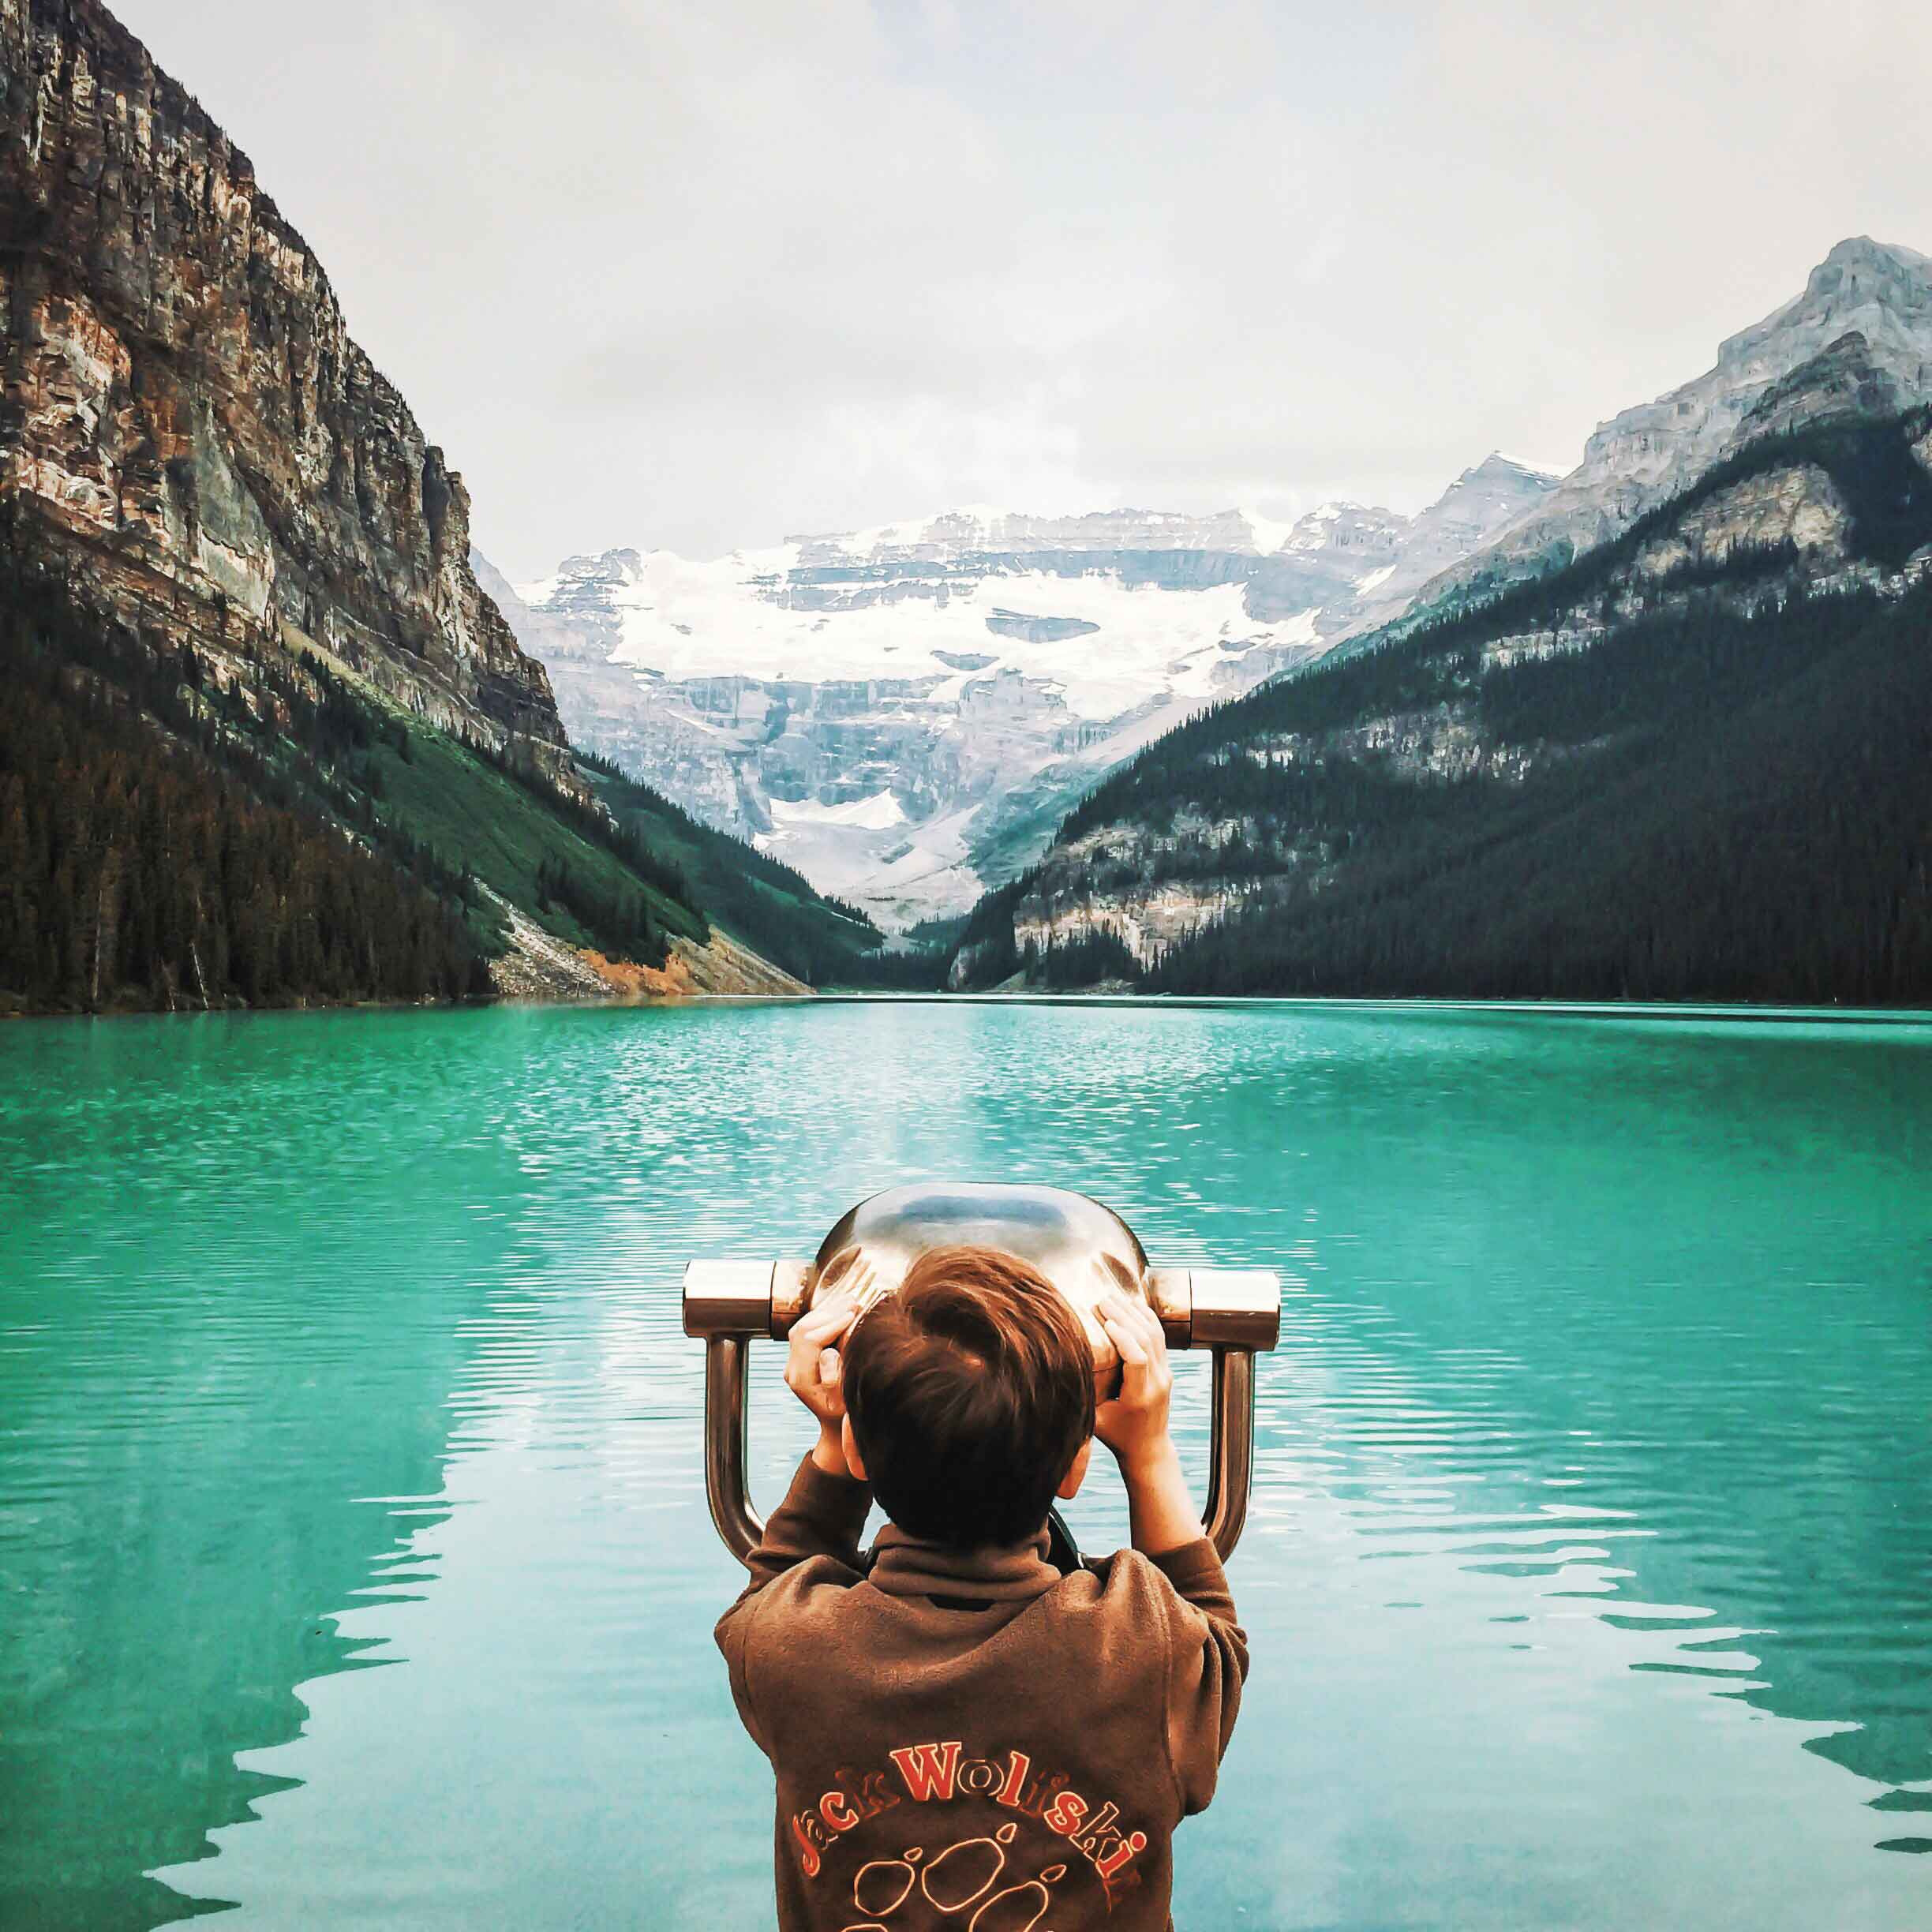 A young person looks through binoculars at the iconic Lake Louise